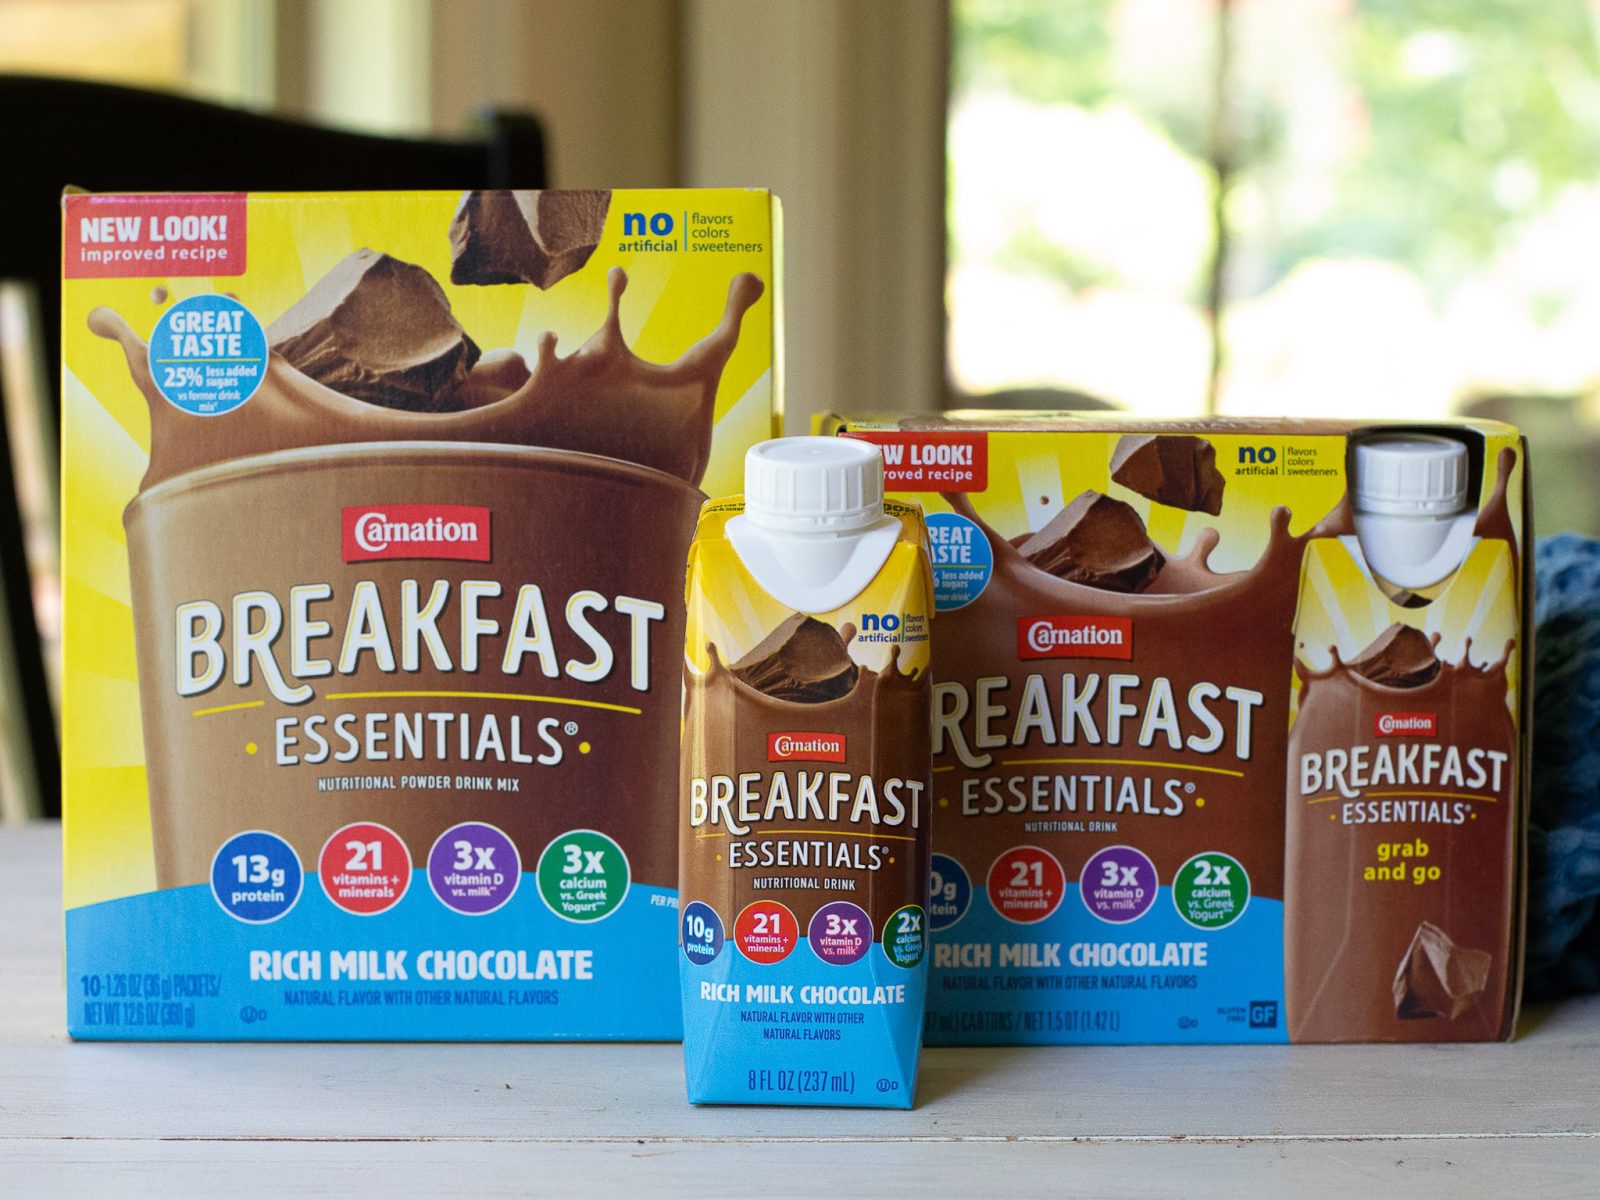 Start The School Day Off Right With Delicious Carnation Breakfast Essentials® – Grab Savings At Publix